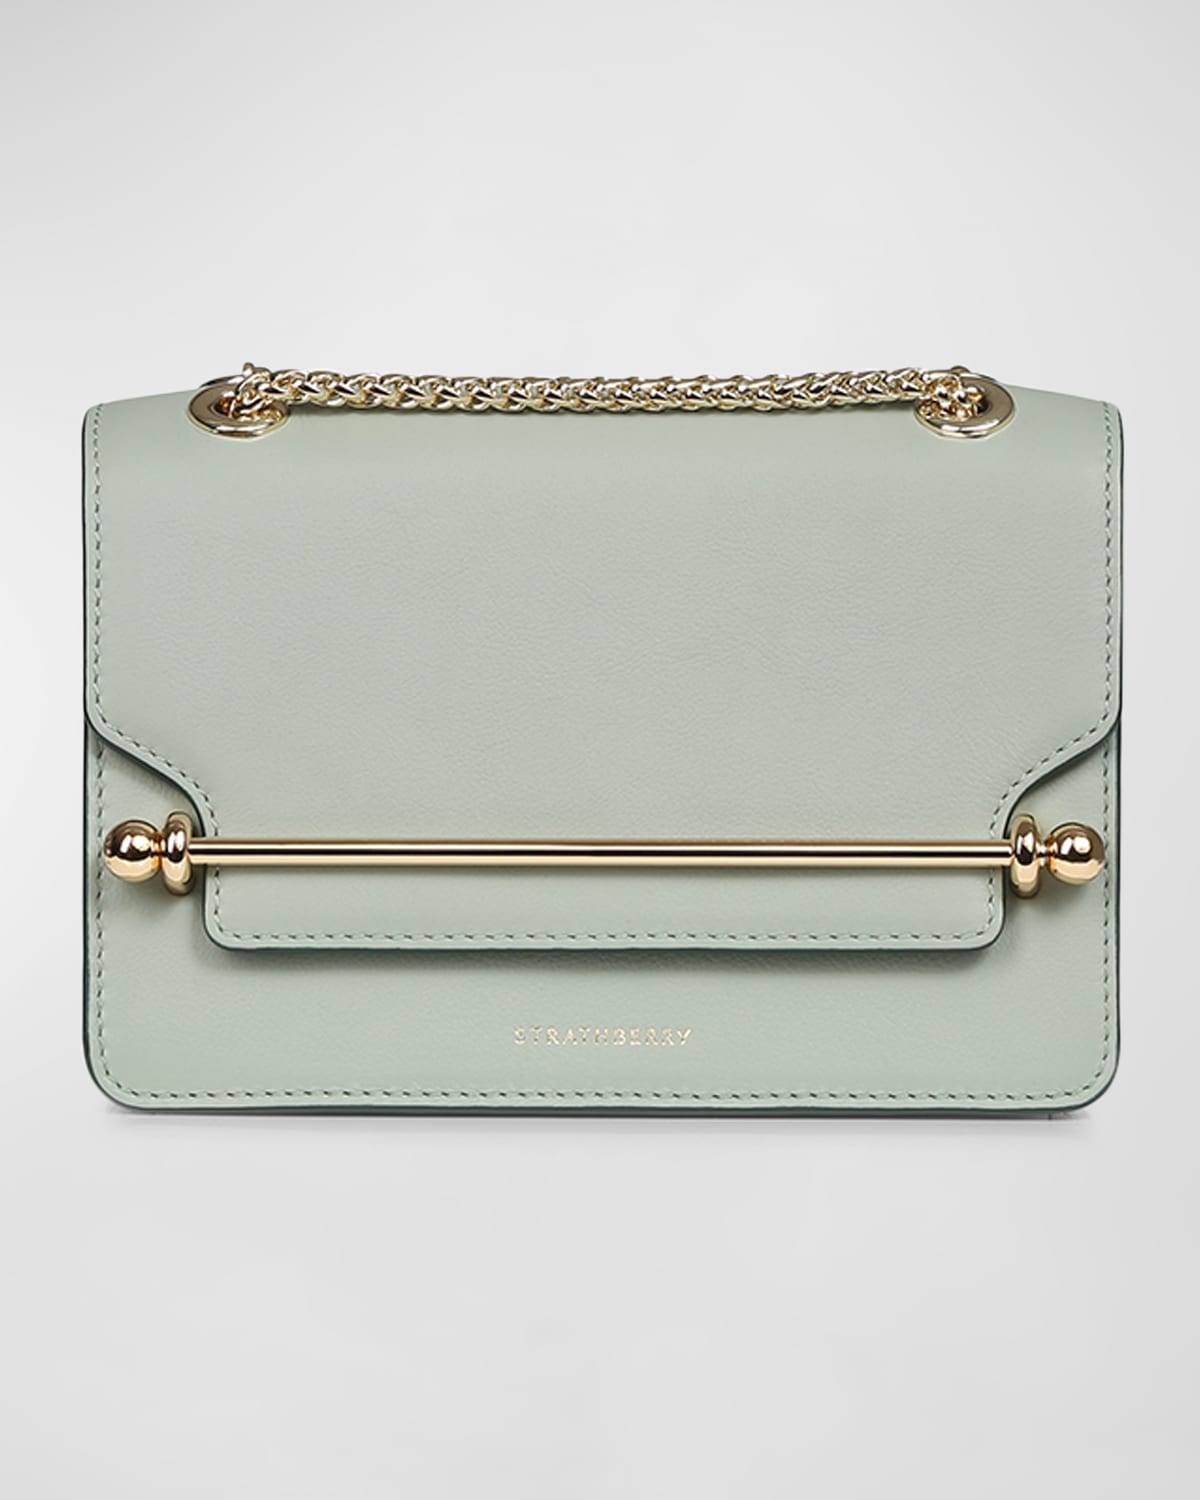 STRATHBERRY EAST-WEST MINI LEATHER CHAIN SHOULDER BAG